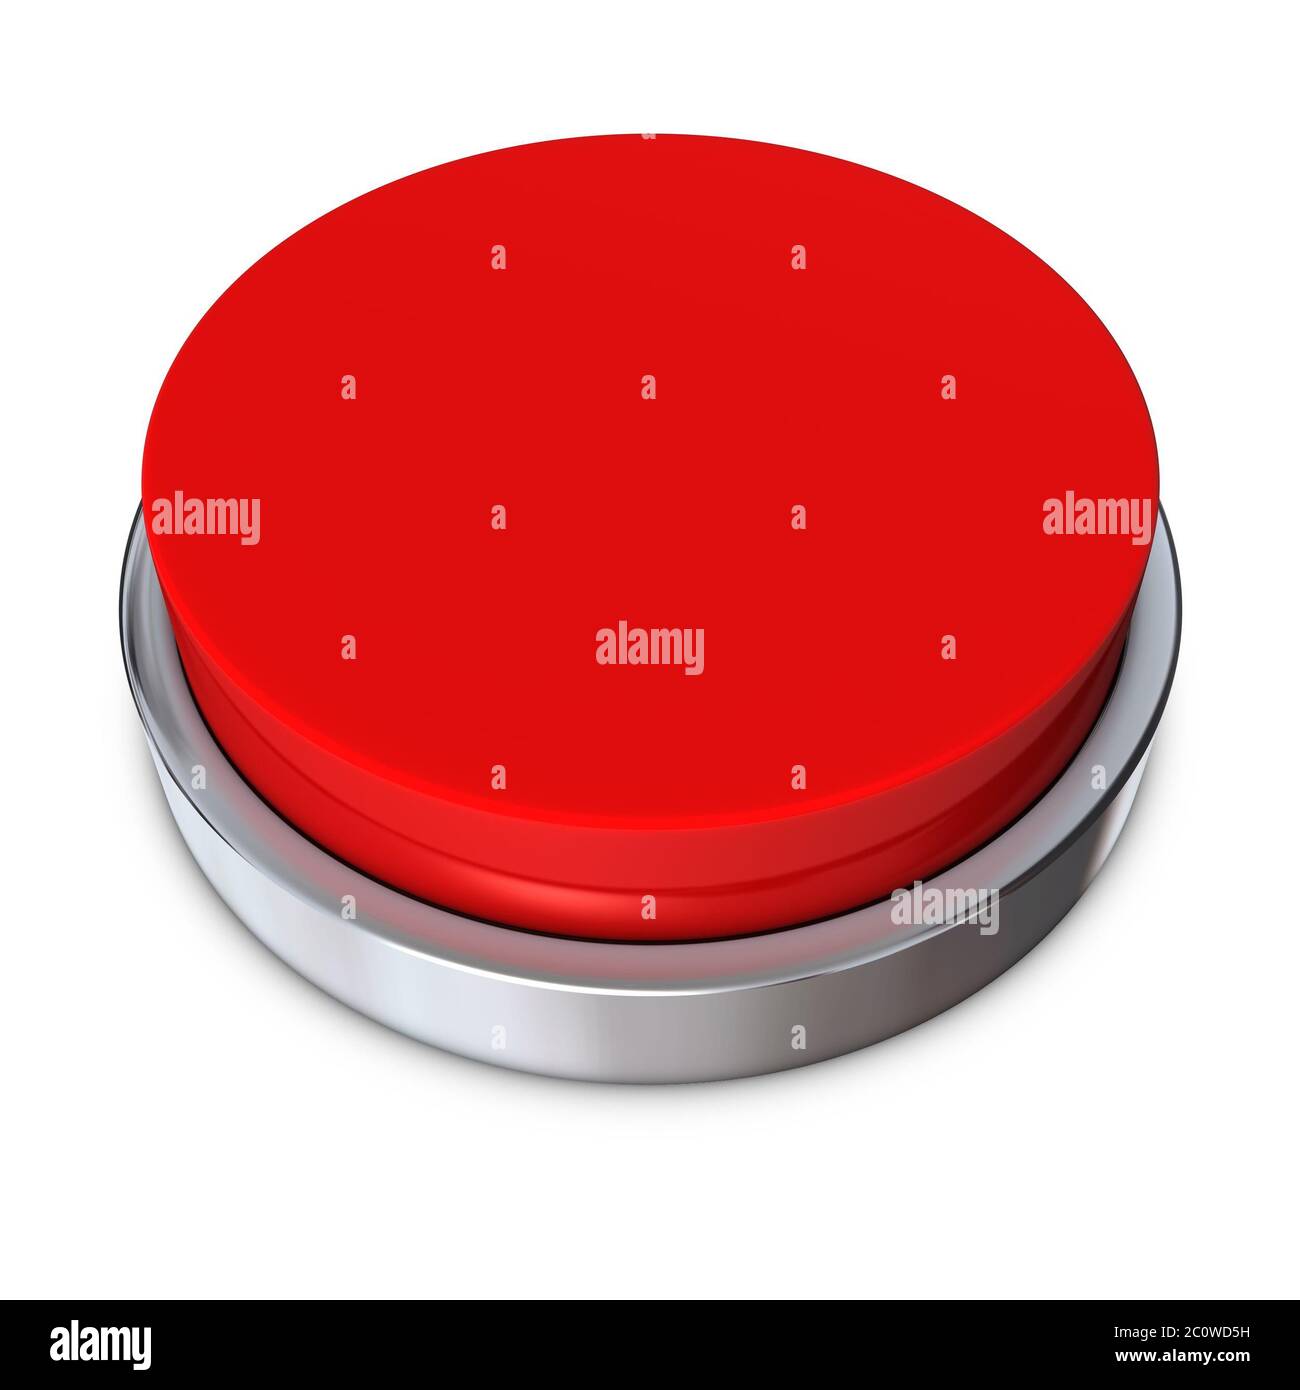 red round push button borderd by a metallic ring - design template Stock Photo